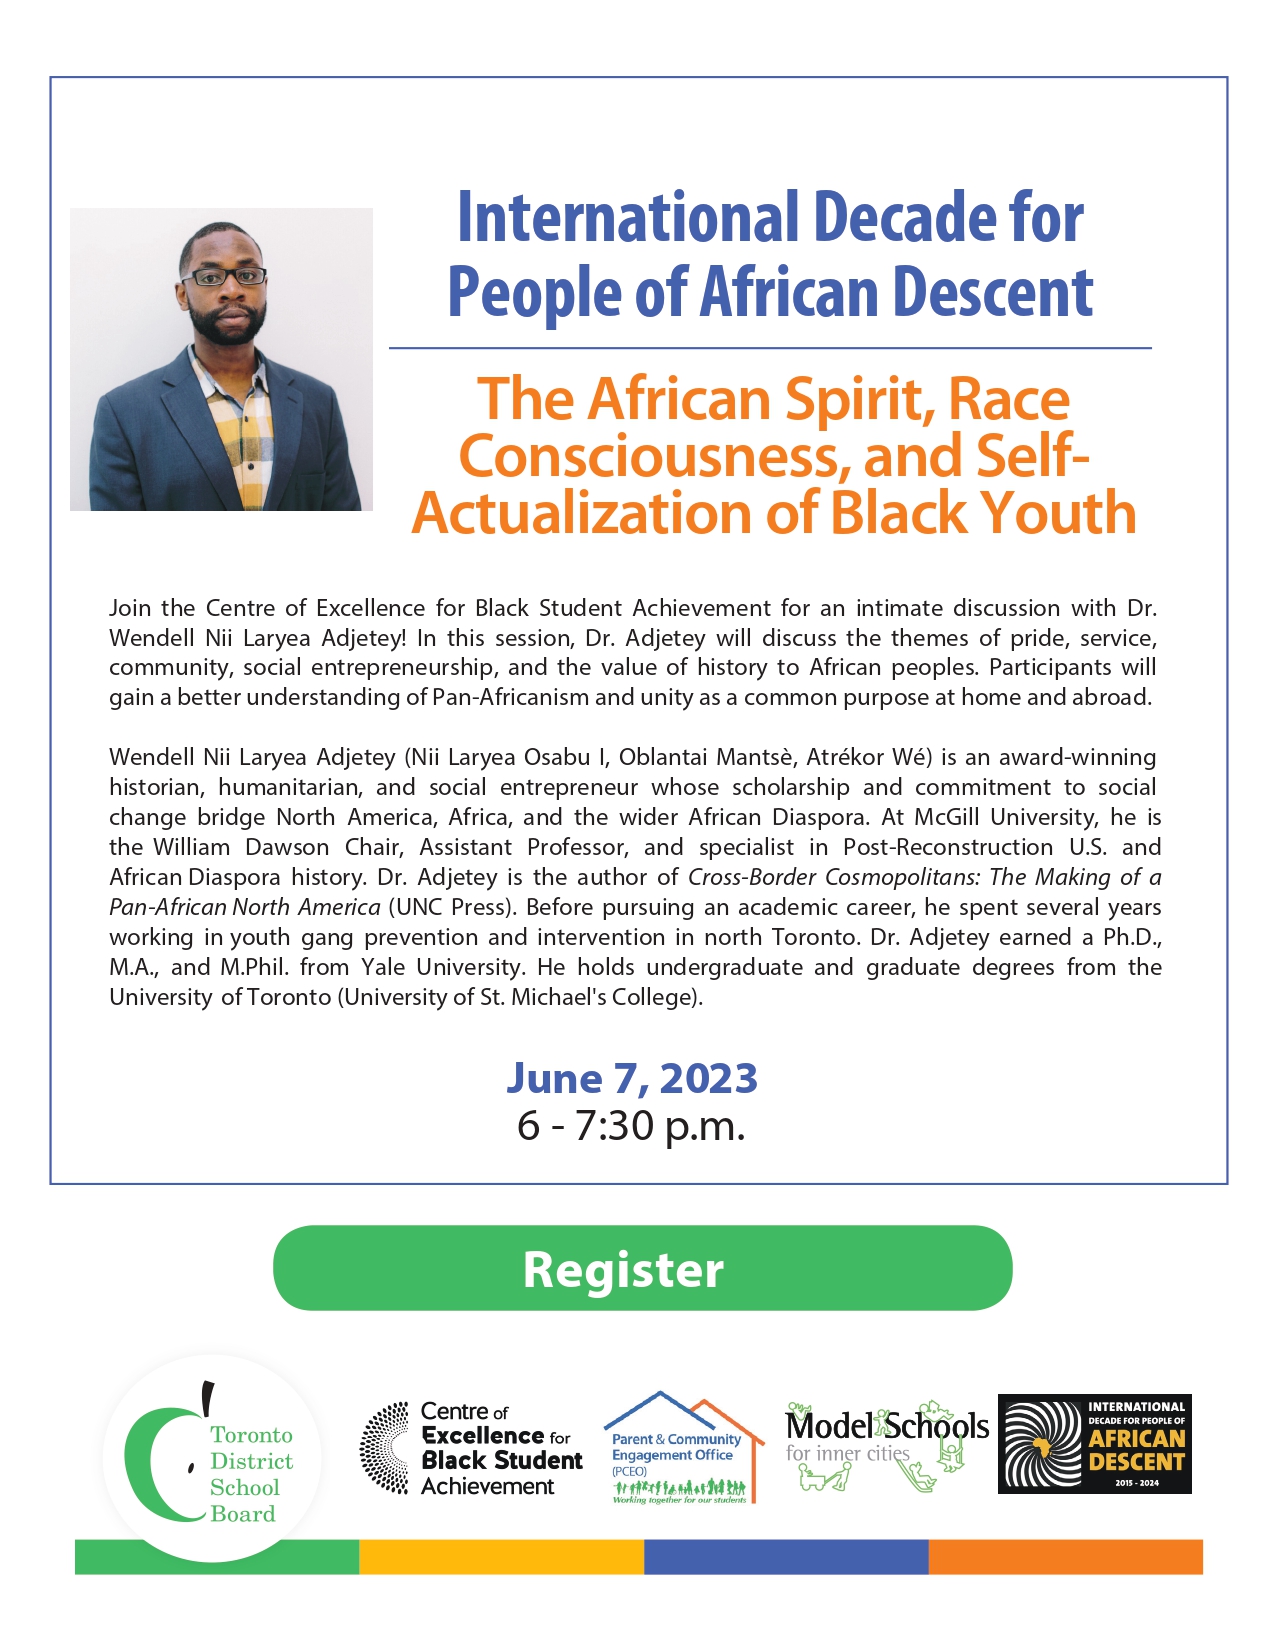 International Decade for People of African Descent Dr Adjetey's Poster